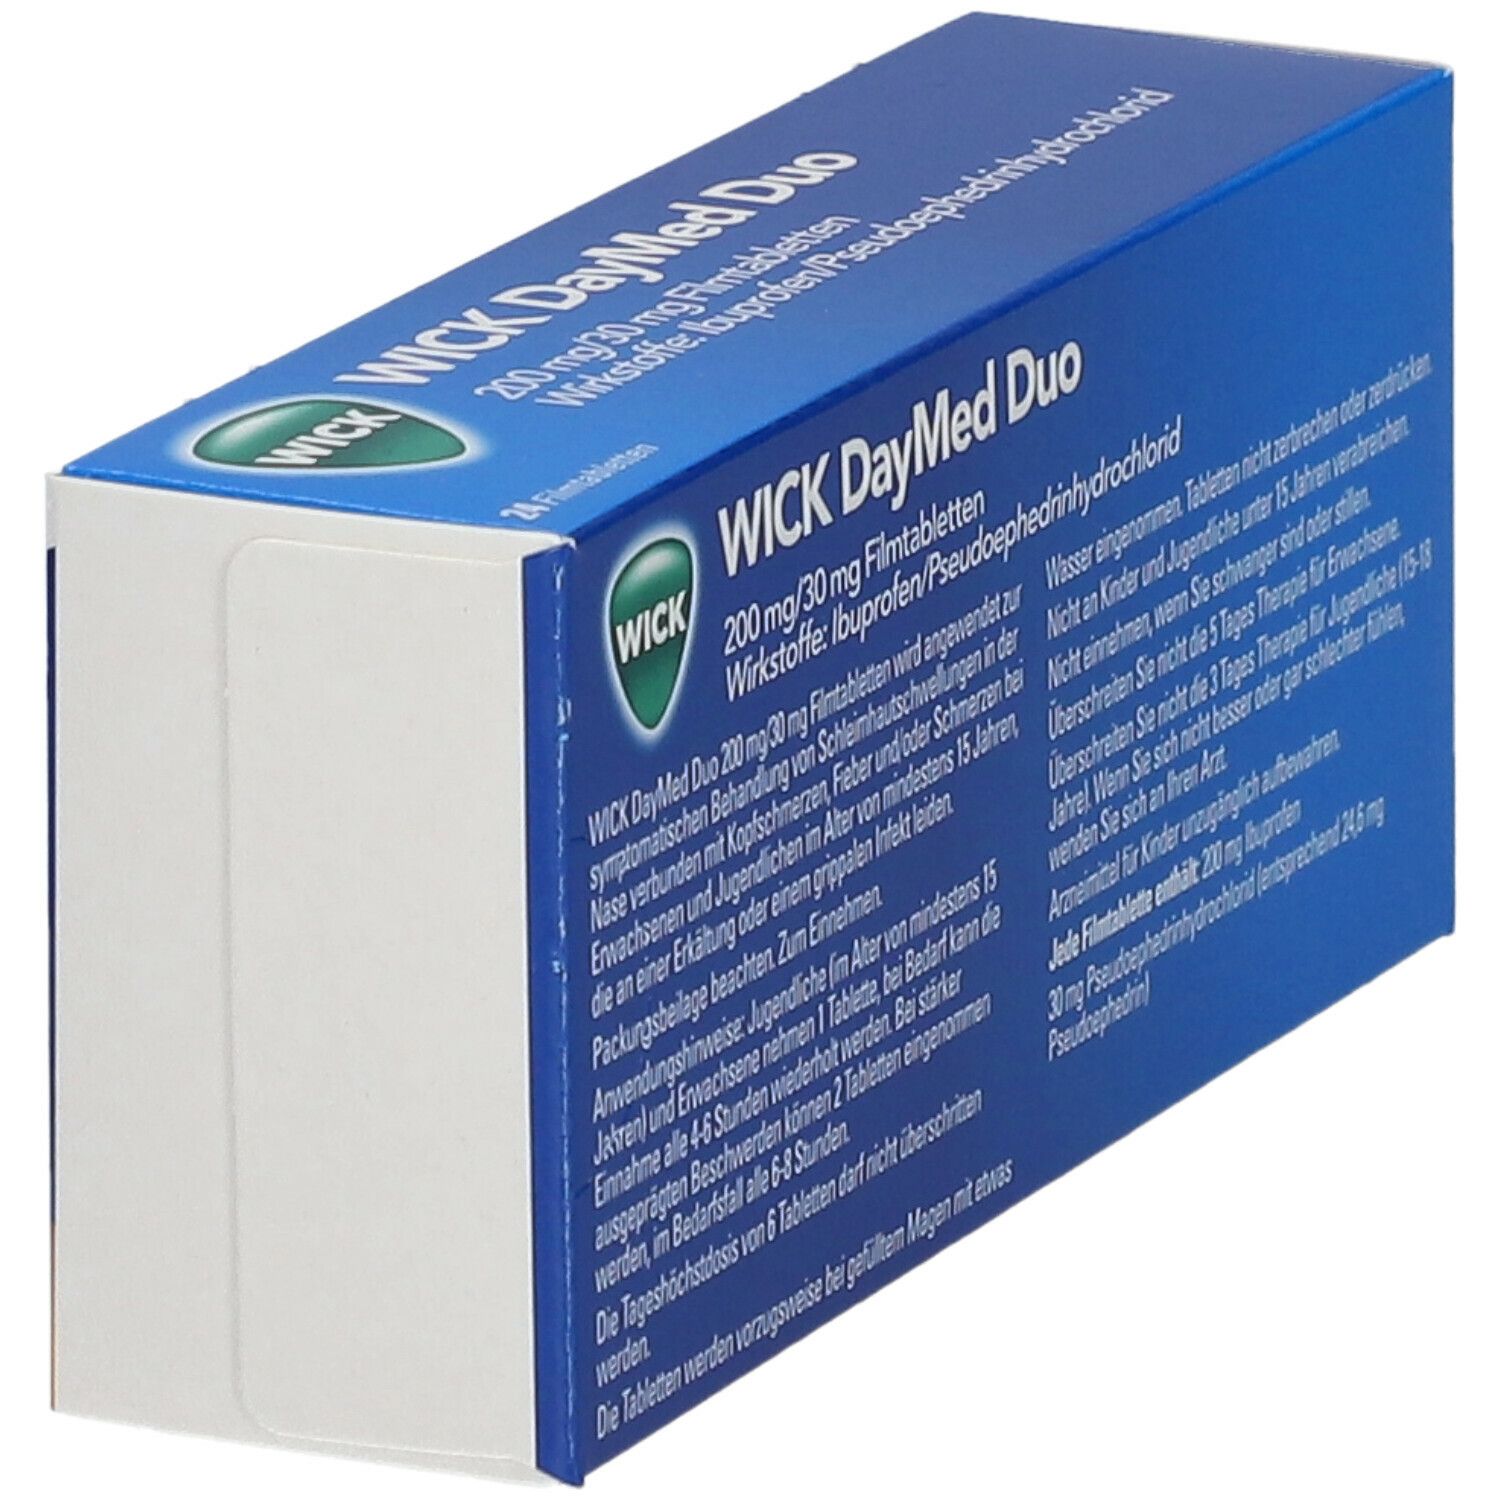 WICK Day Med Duo 200 mg/30 mg